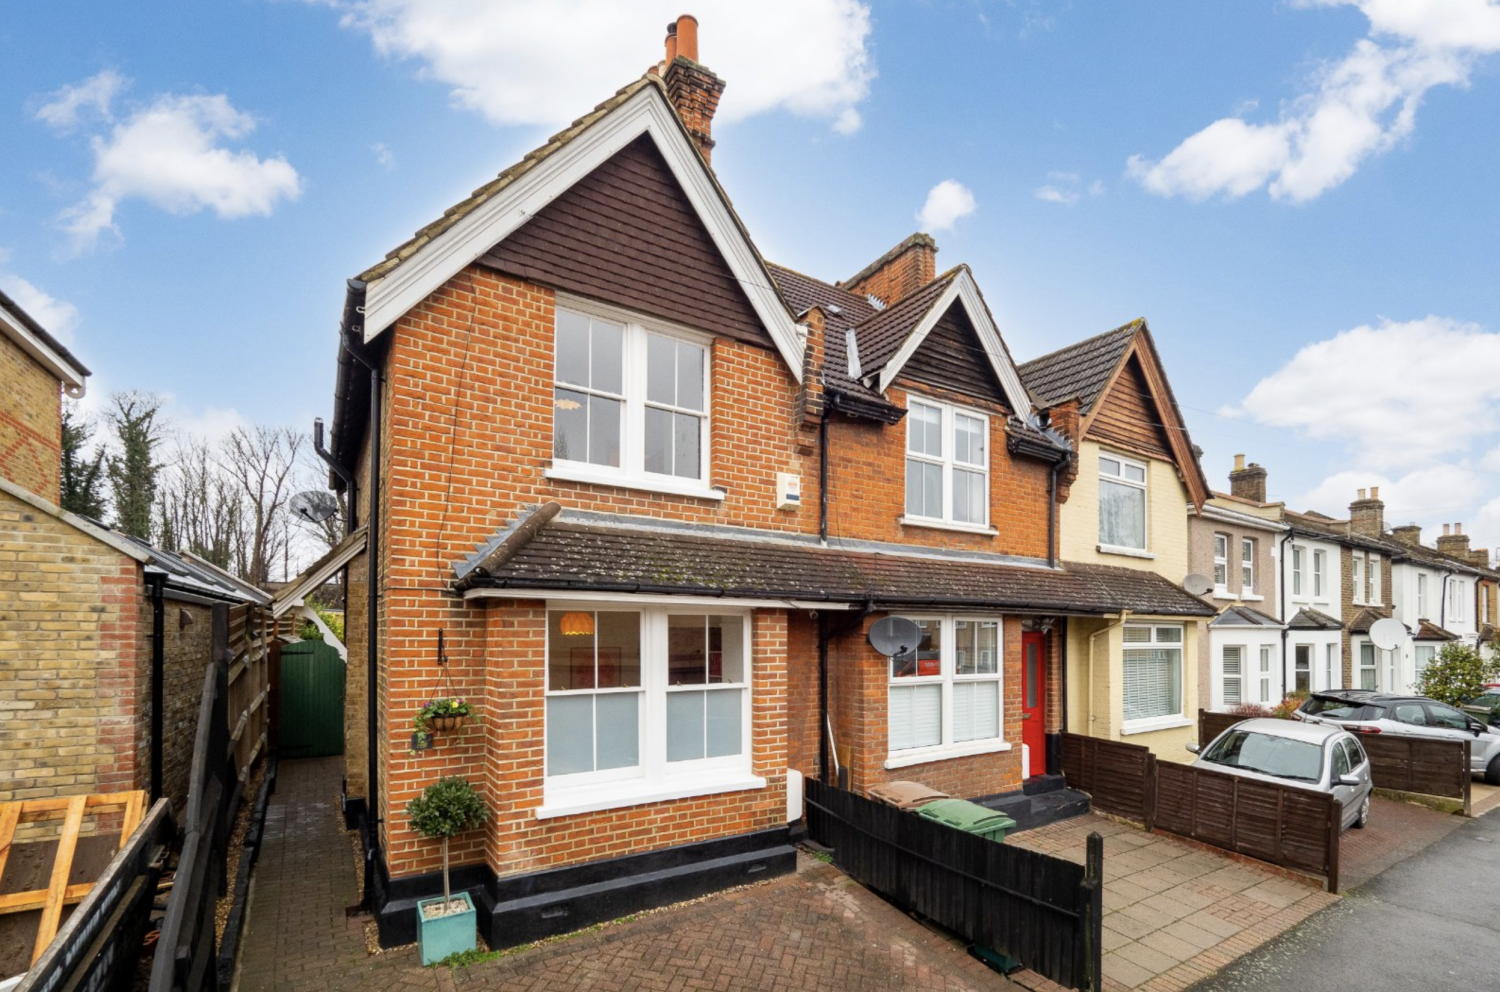 Red brick Edwardian semi-detached family home with gabled roof at the front and off-street parking